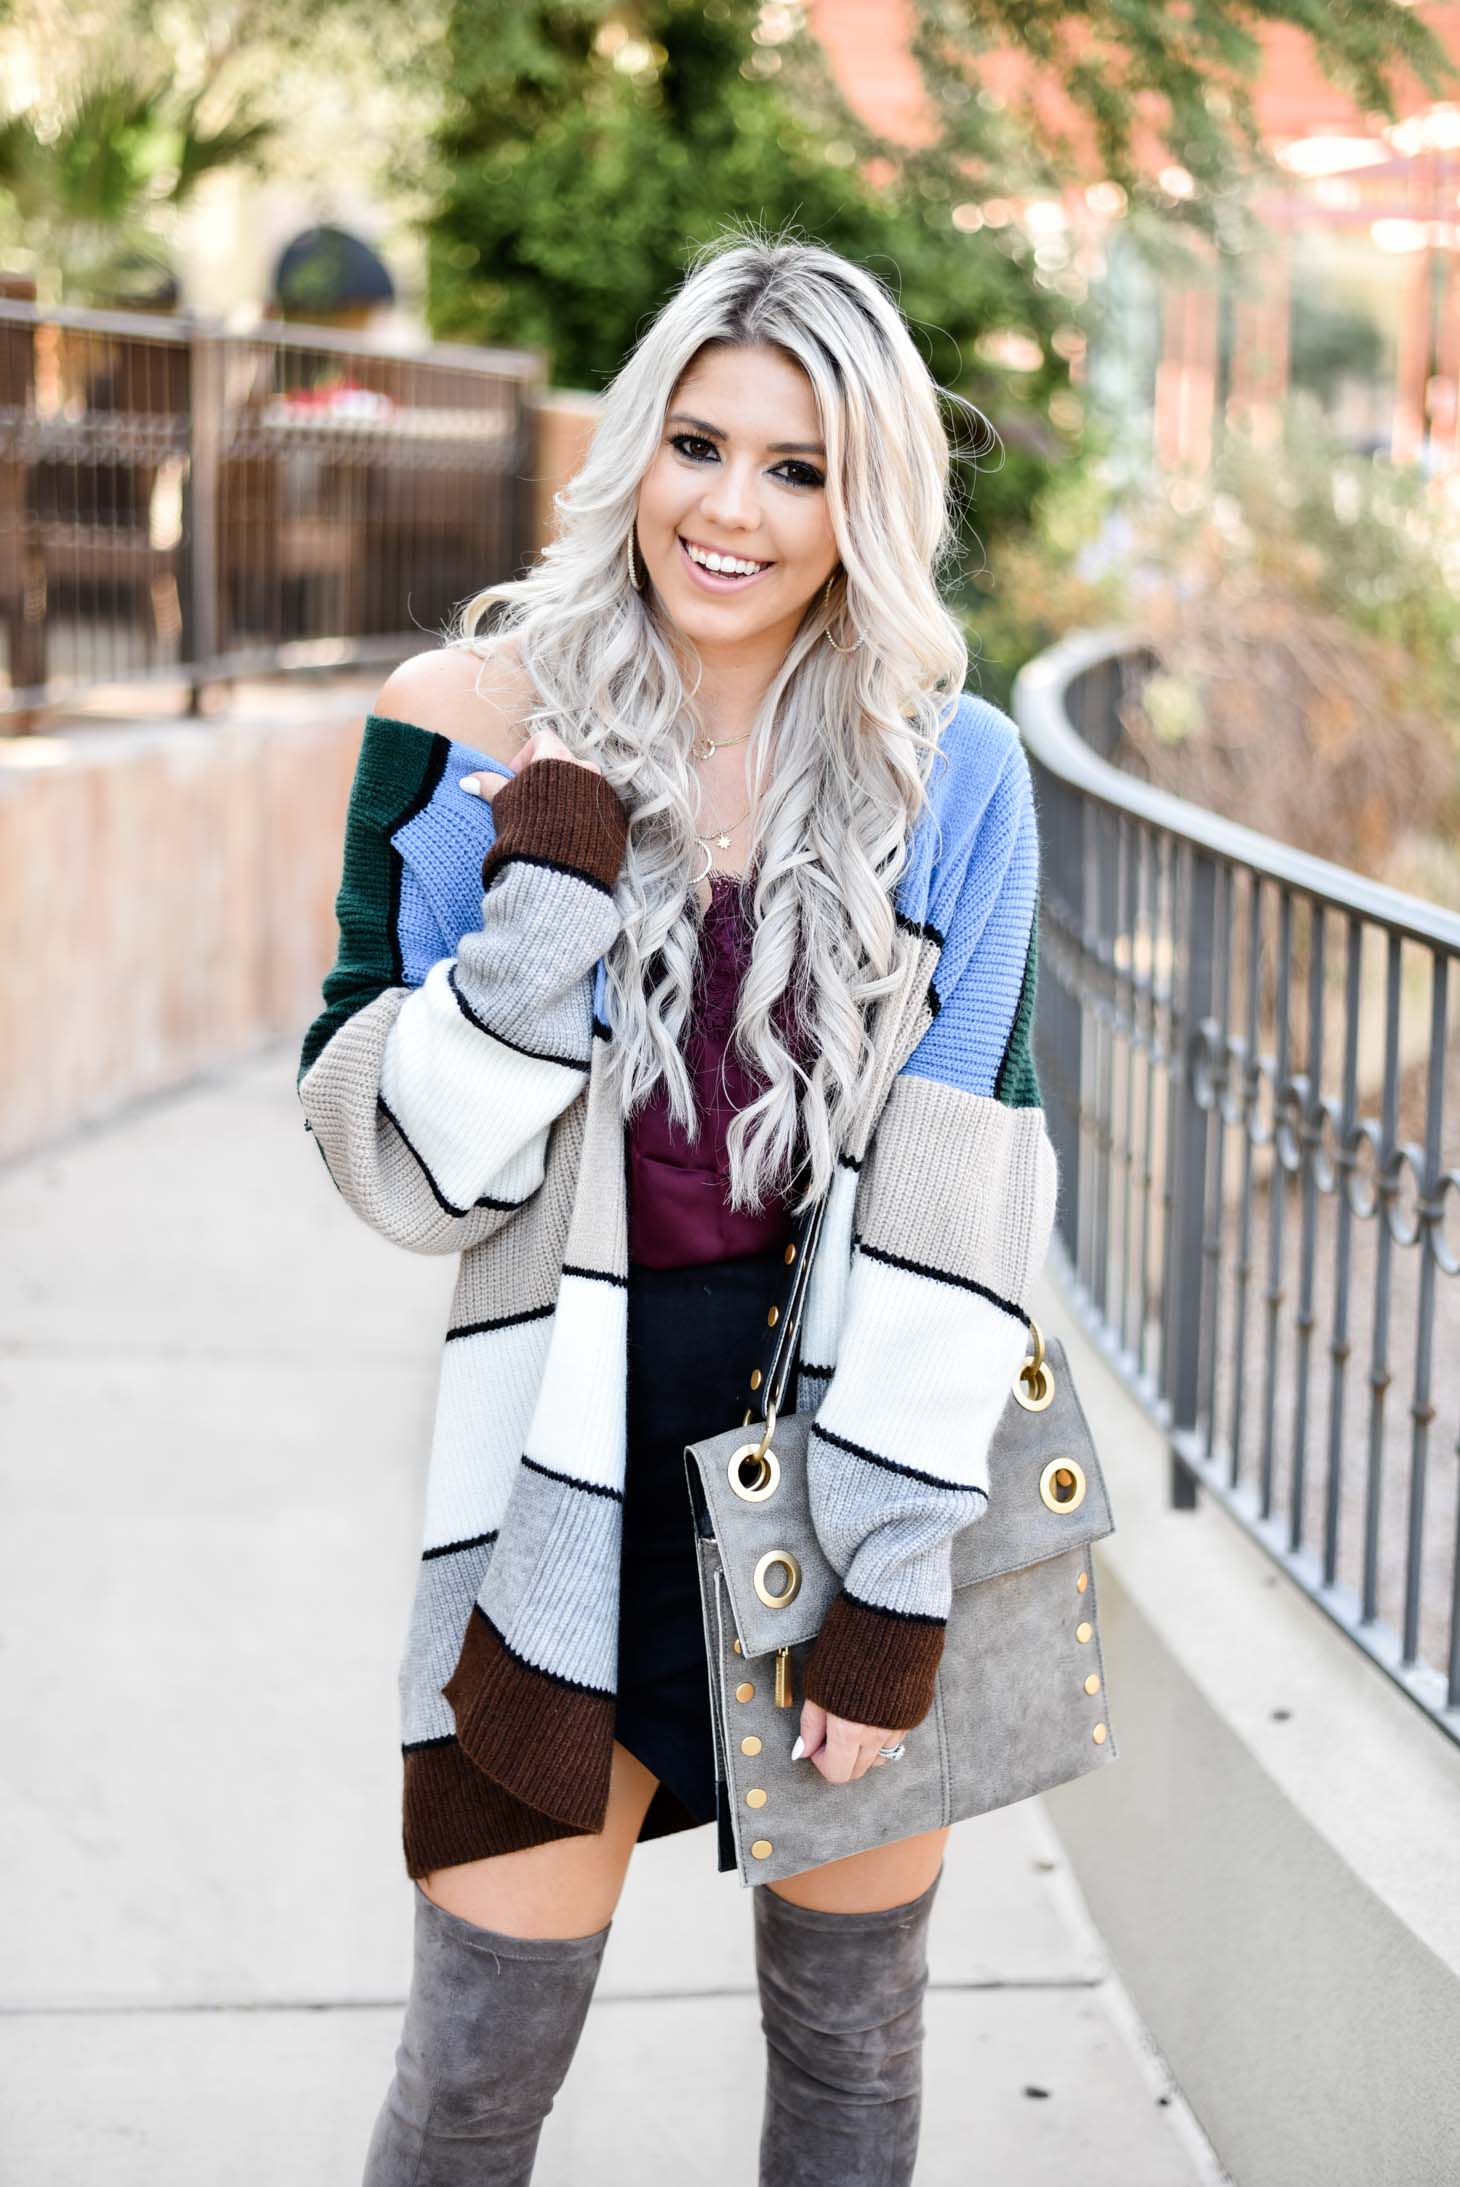 Erin Elizabeth of Wink and a Twirl shares a fun fall style from Goodnight Macaroon